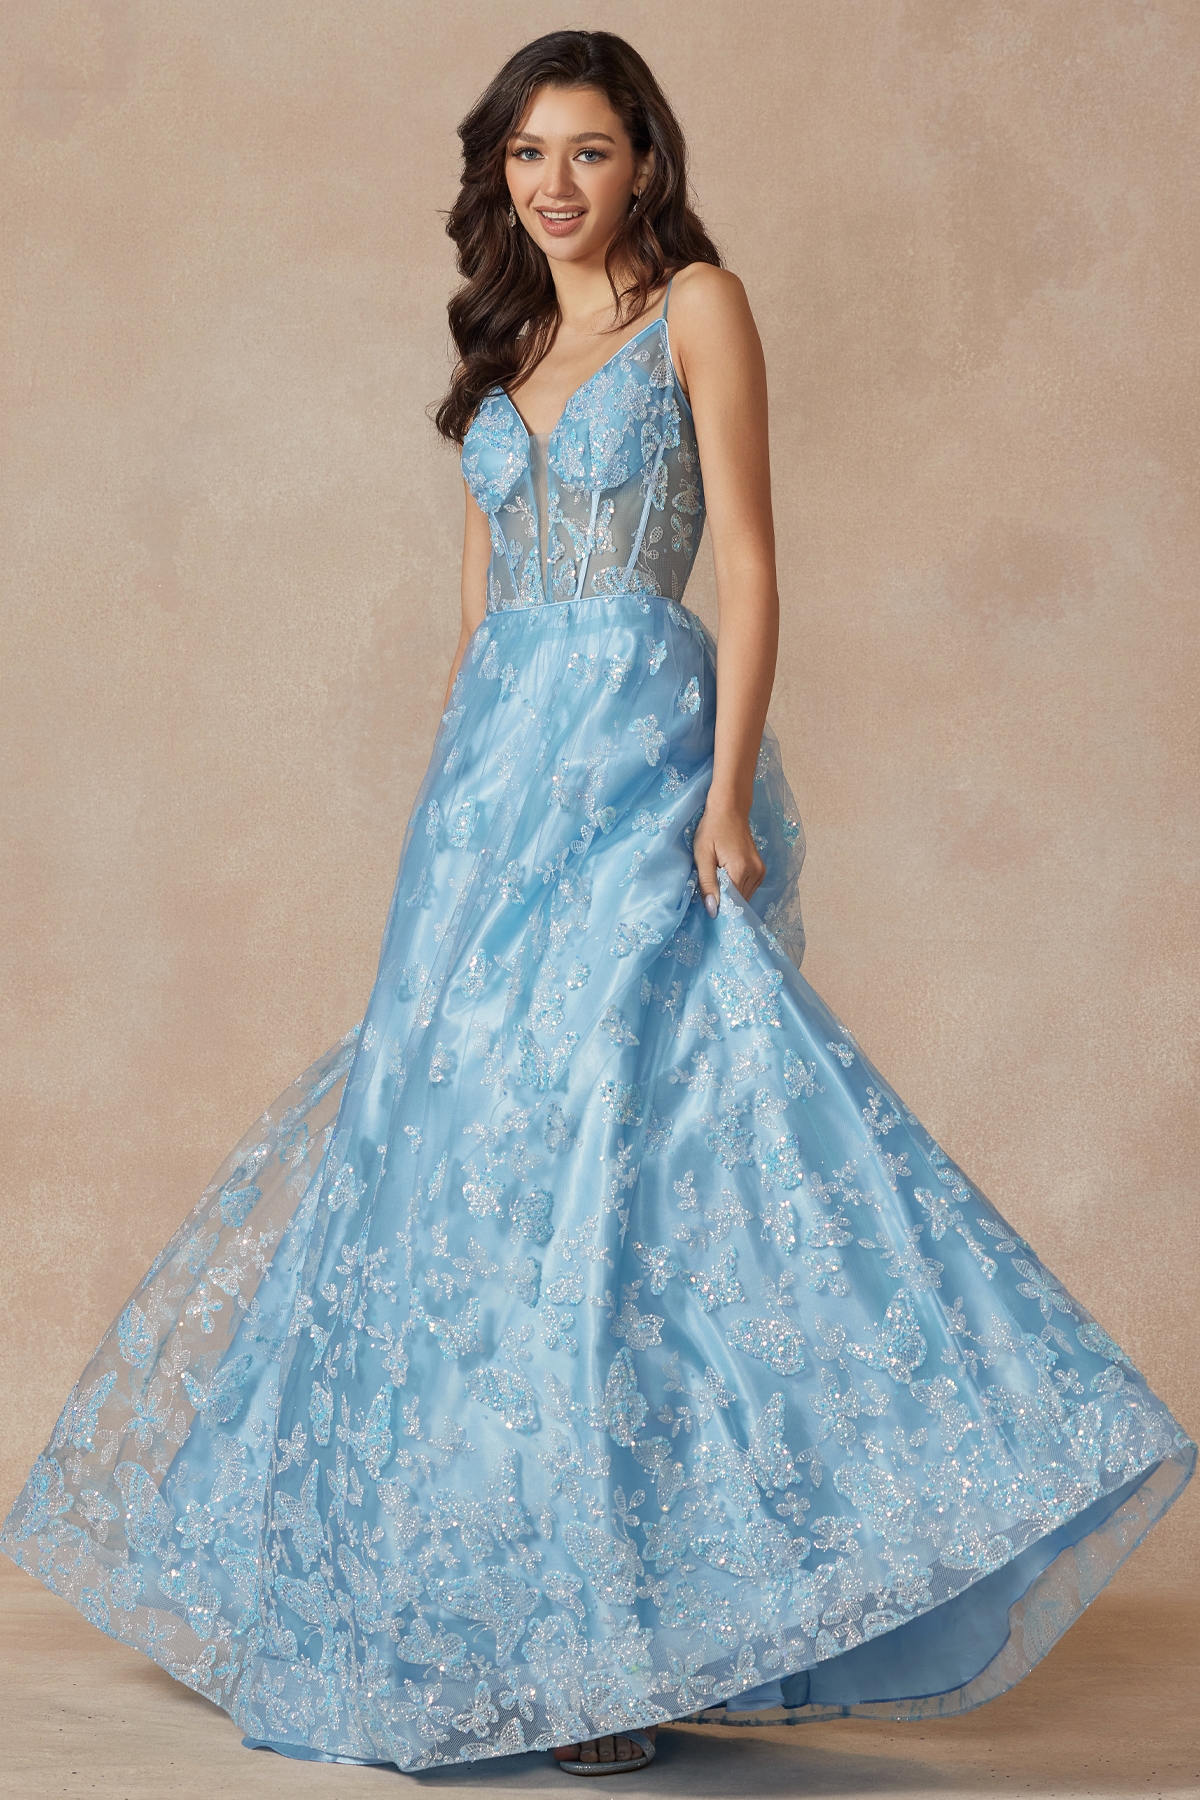 The Ice Blue Glitter Overlay Trumpet Dress – Cason Couture